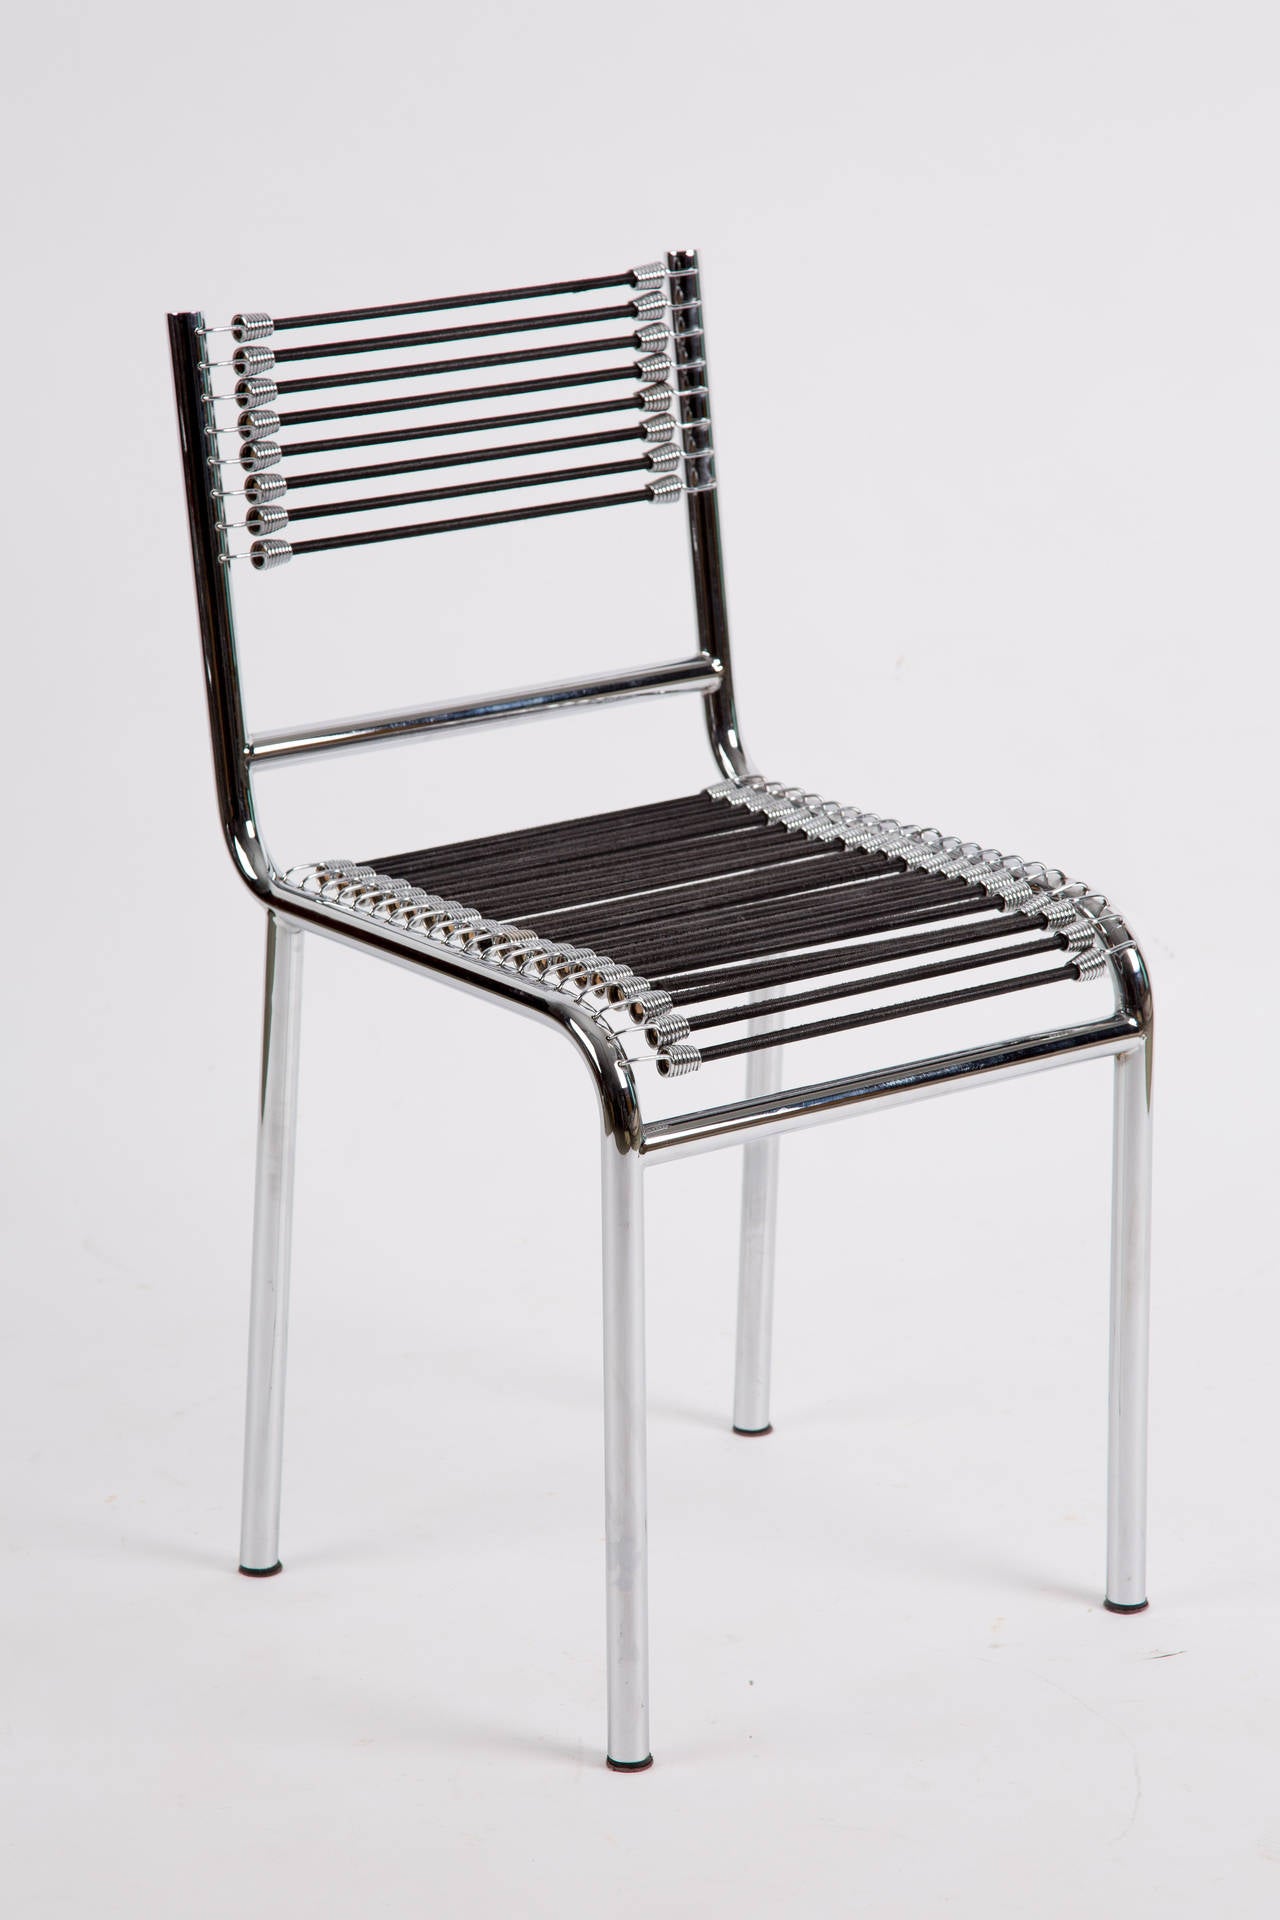 A set of four chrome plated chairs from 1989. The sitting and back are of elastic bands with fabric.